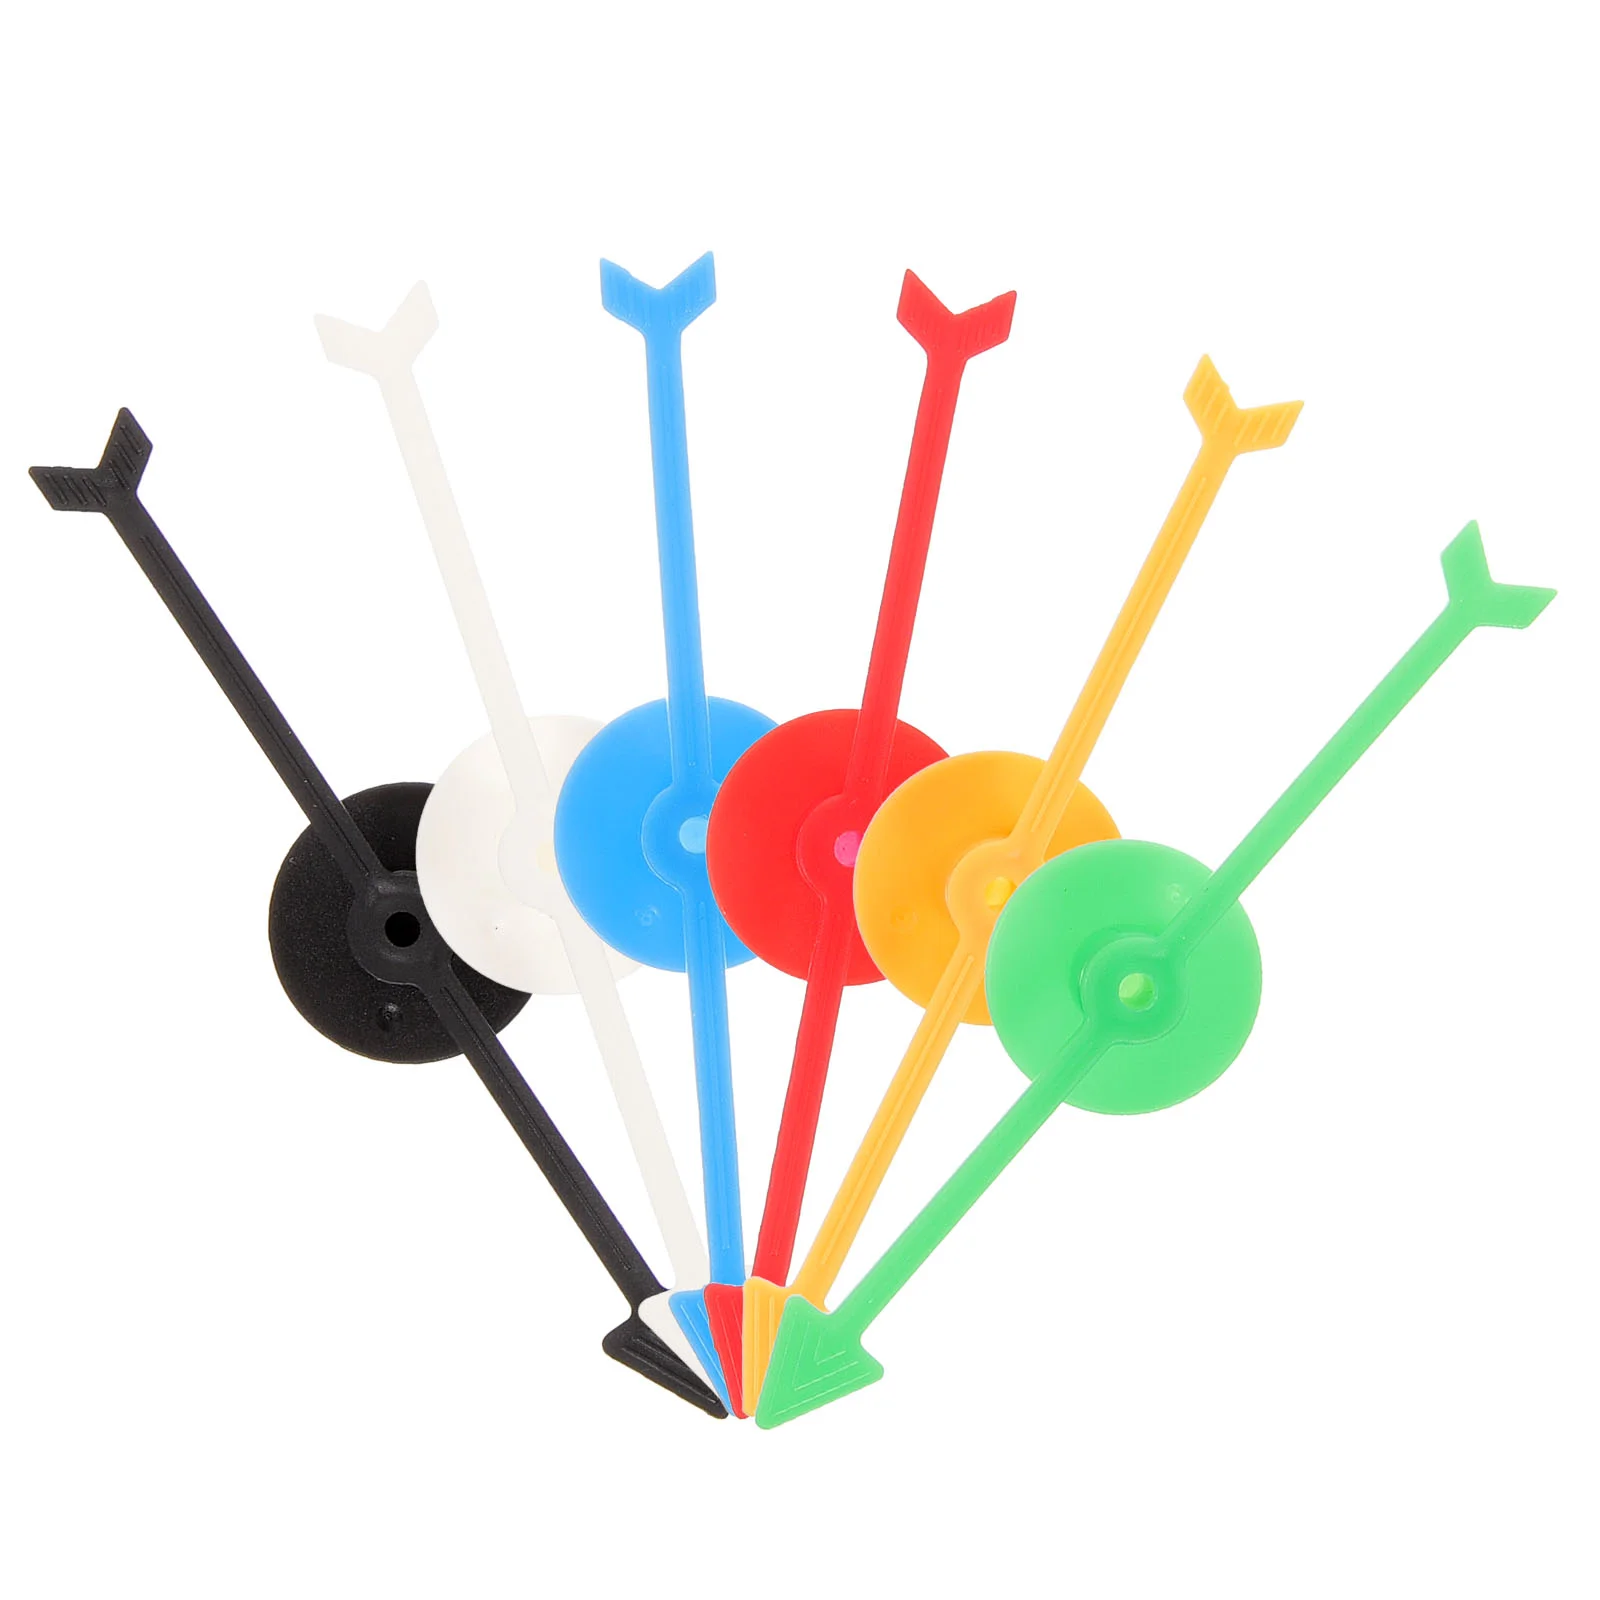 

6 Pcs Rotating Plastic Pointer Digital Turntable DIY Accessories Desktop Arrows Spinners Board Games For Child